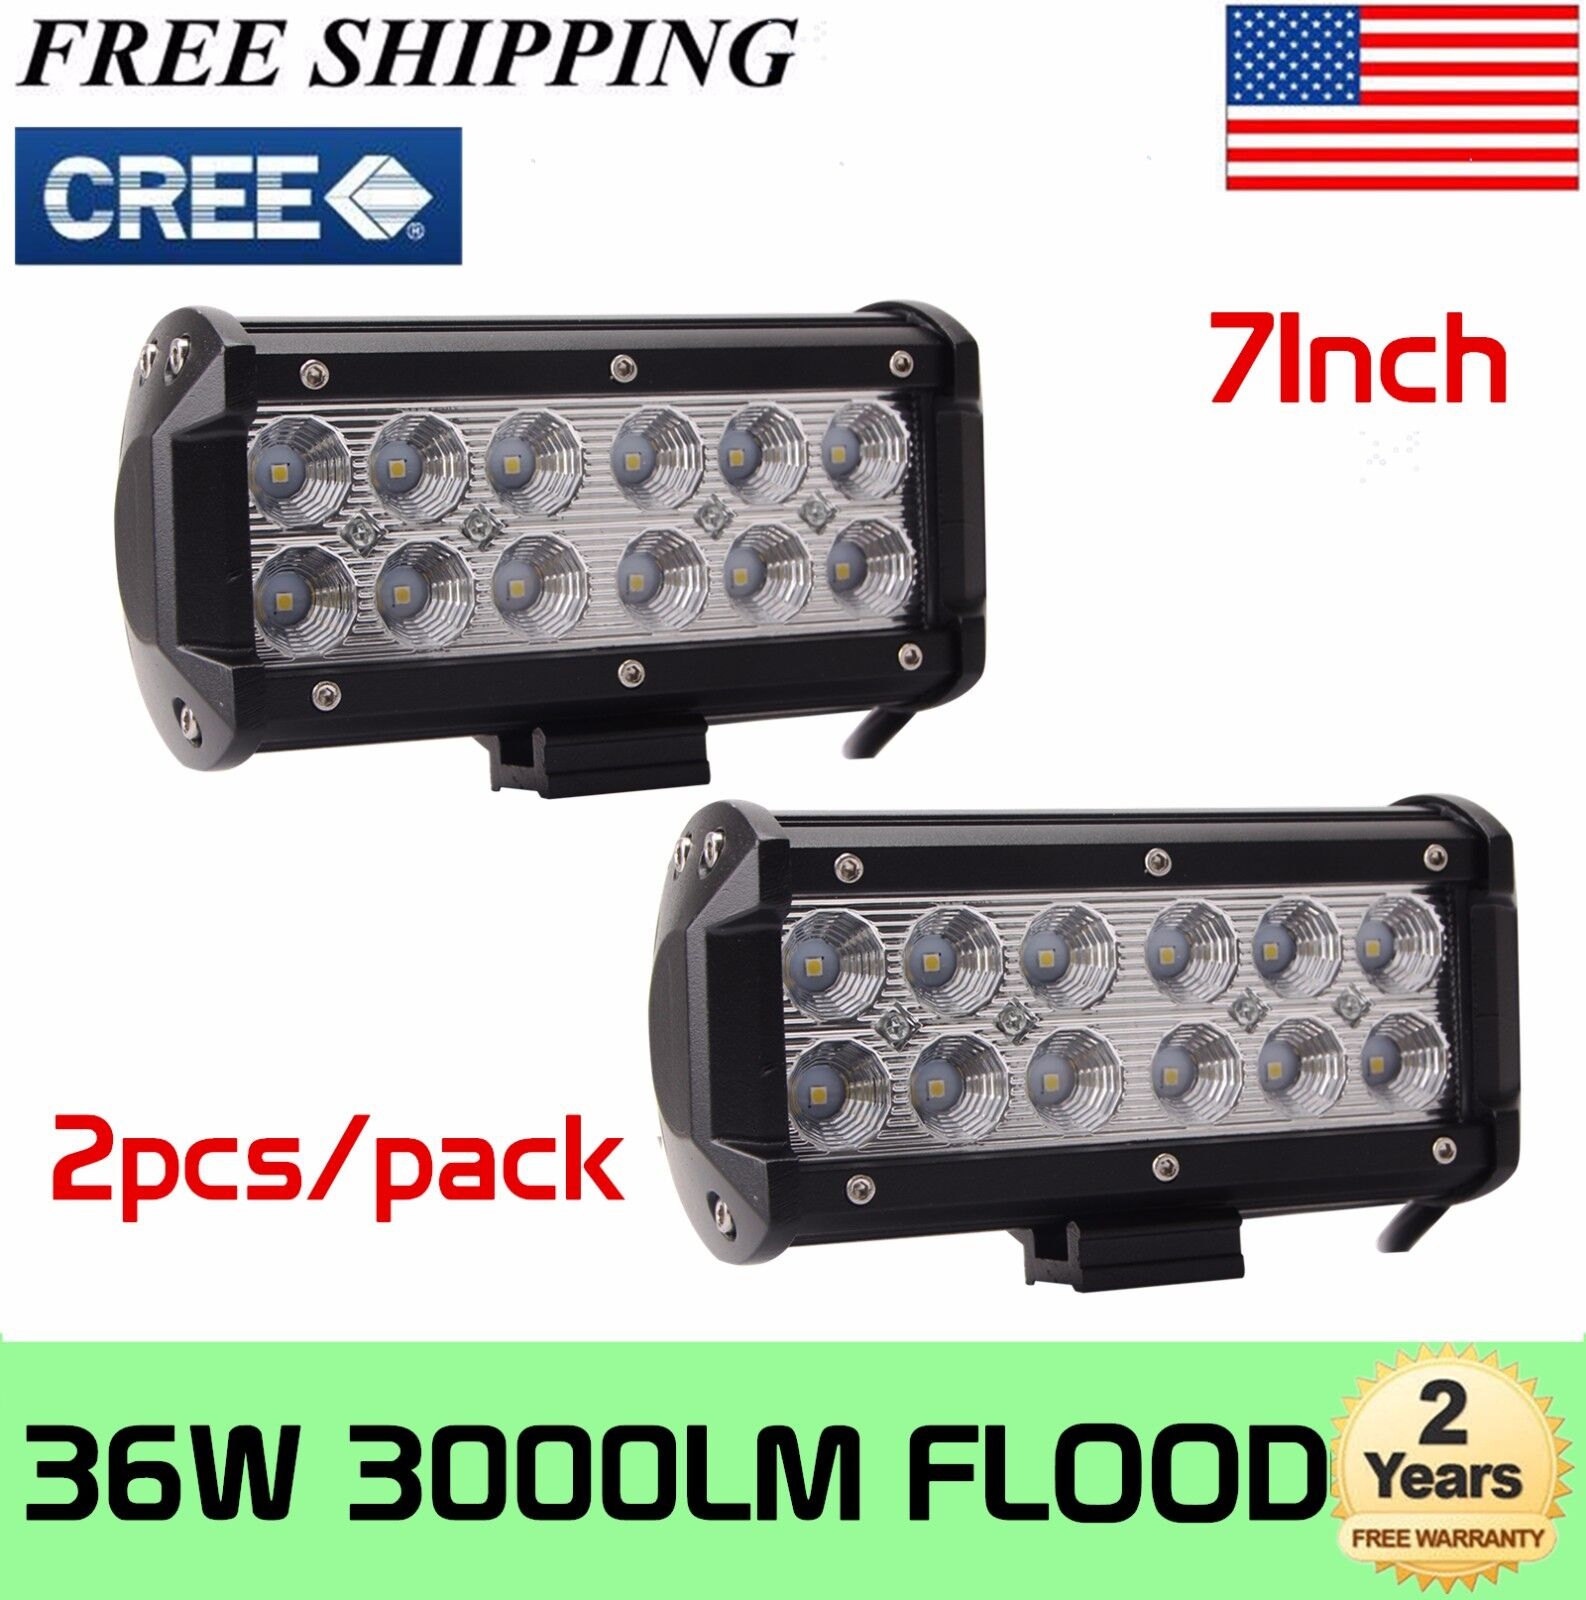 2PCS 7INCH 36W LED WORK LIGHT BAR FLOOD for OFFROAD 4WD BOAT SUV FOG DRIVING 72W